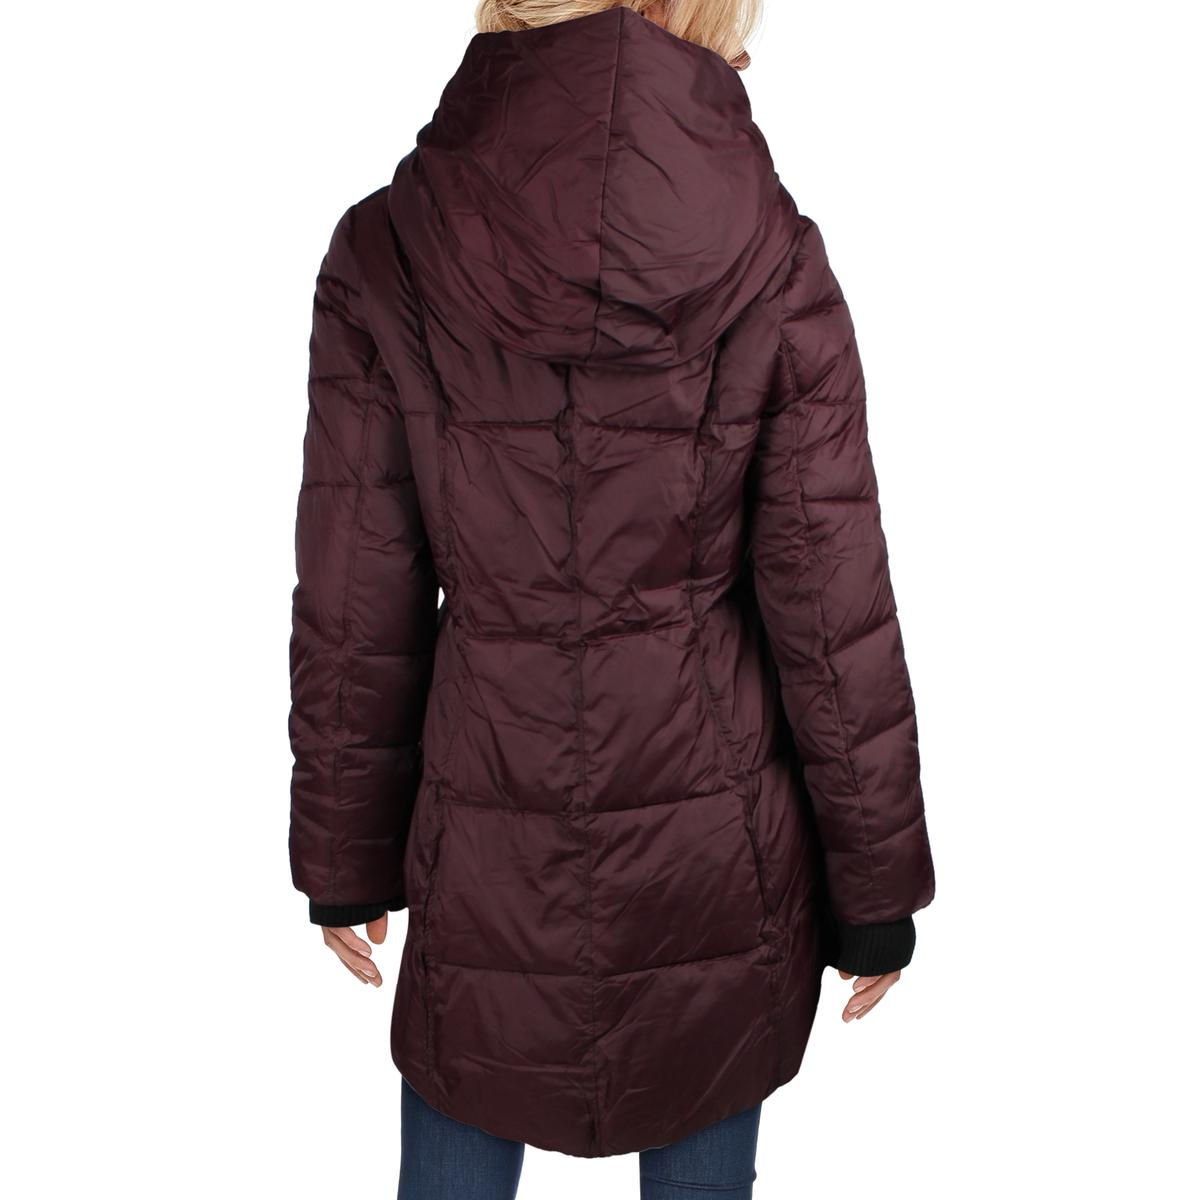 French Connection Womens Winter Water, Sears Winter Coat Clearance